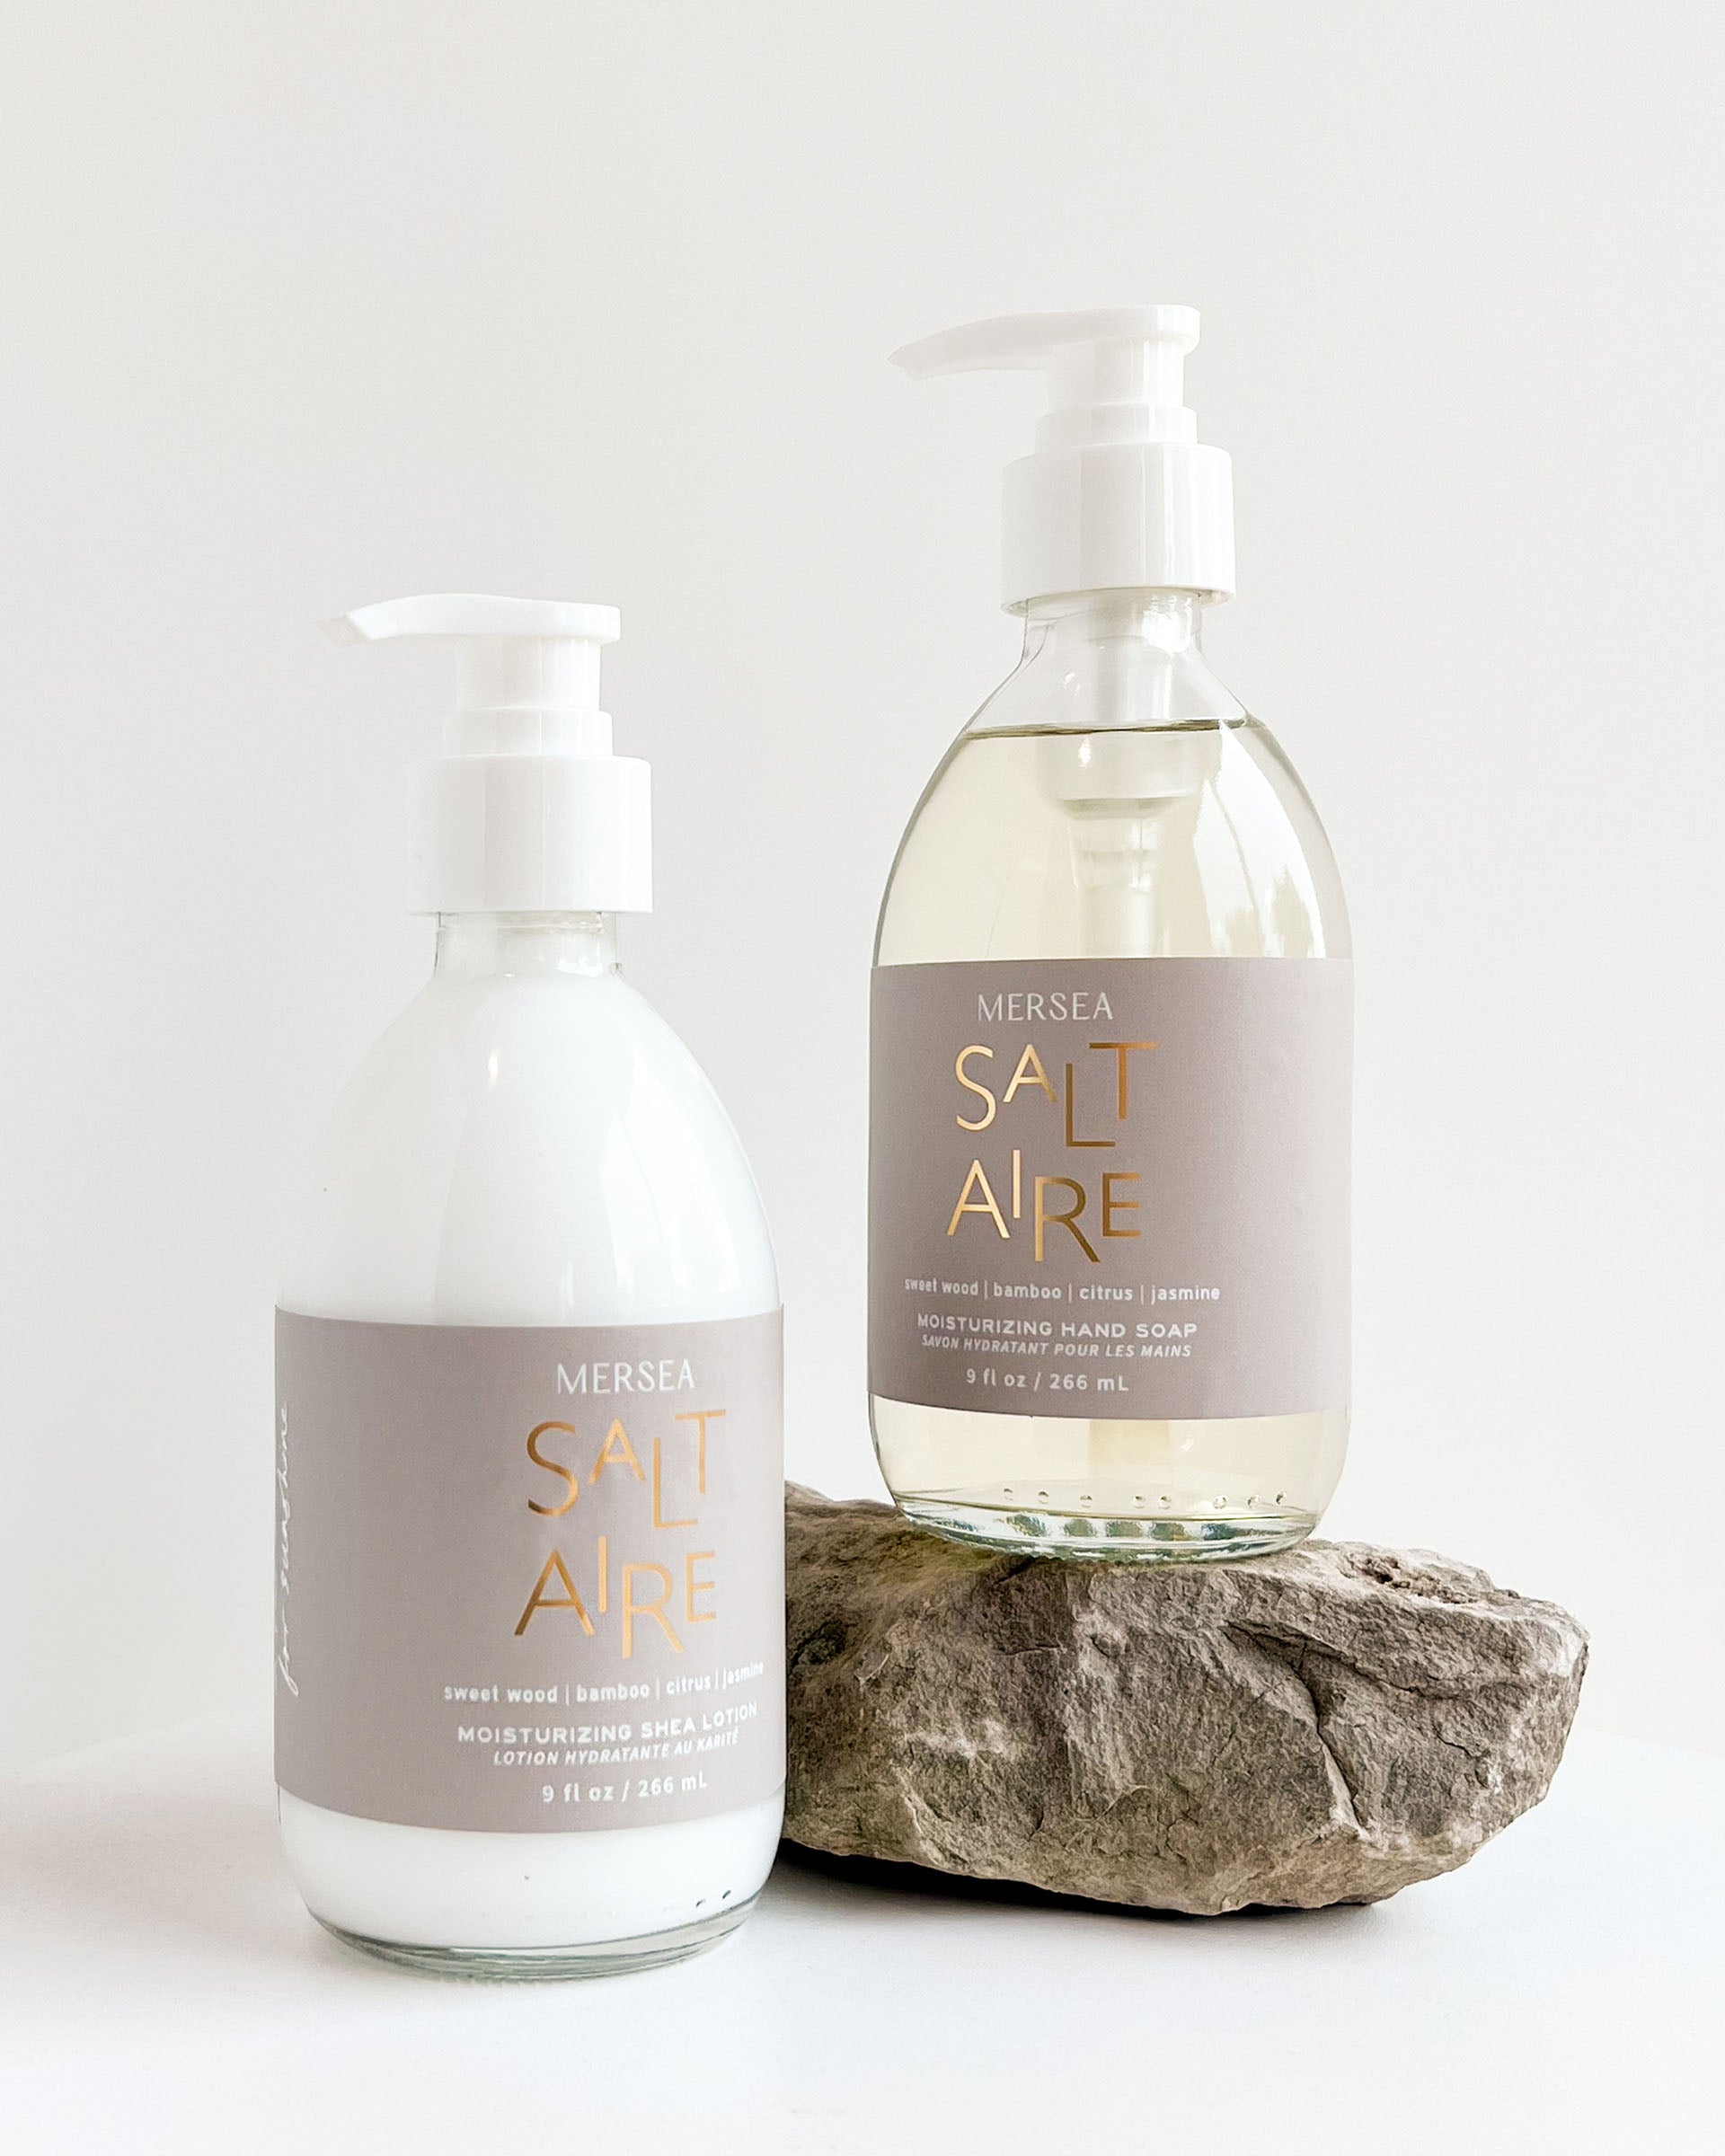 saltaire hand soap and shea lotion laying on a white background